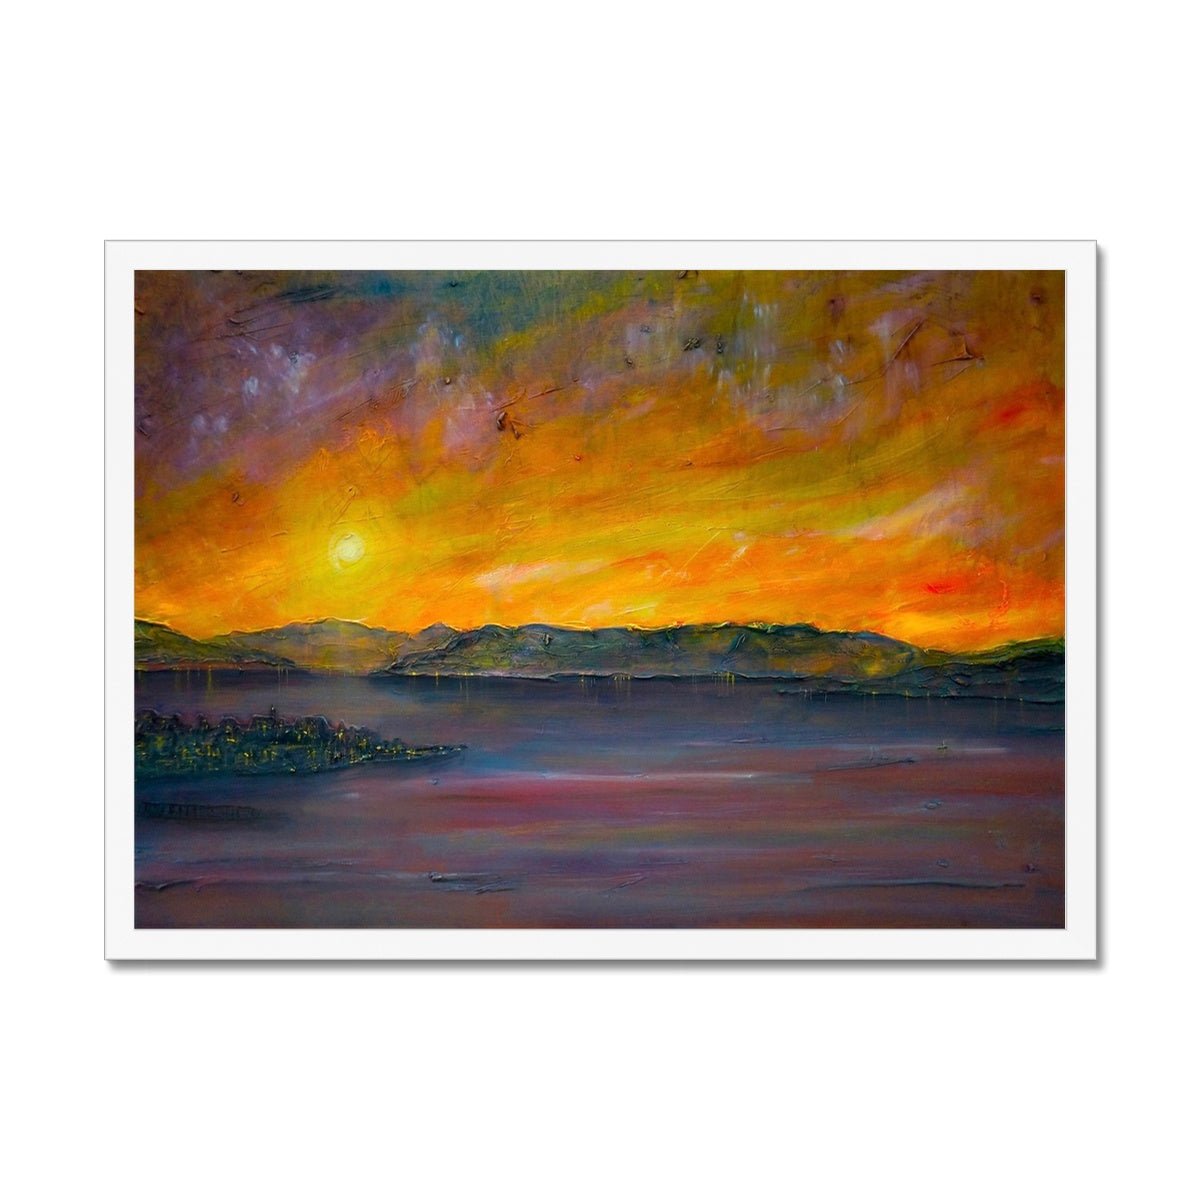 Sunset Over Gourock Painting | Framed Prints From Scotland-Framed Prints-River Clyde Art Gallery-A2 Landscape-White Frame-Paintings, Prints, Homeware, Art Gifts From Scotland By Scottish Artist Kevin Hunter